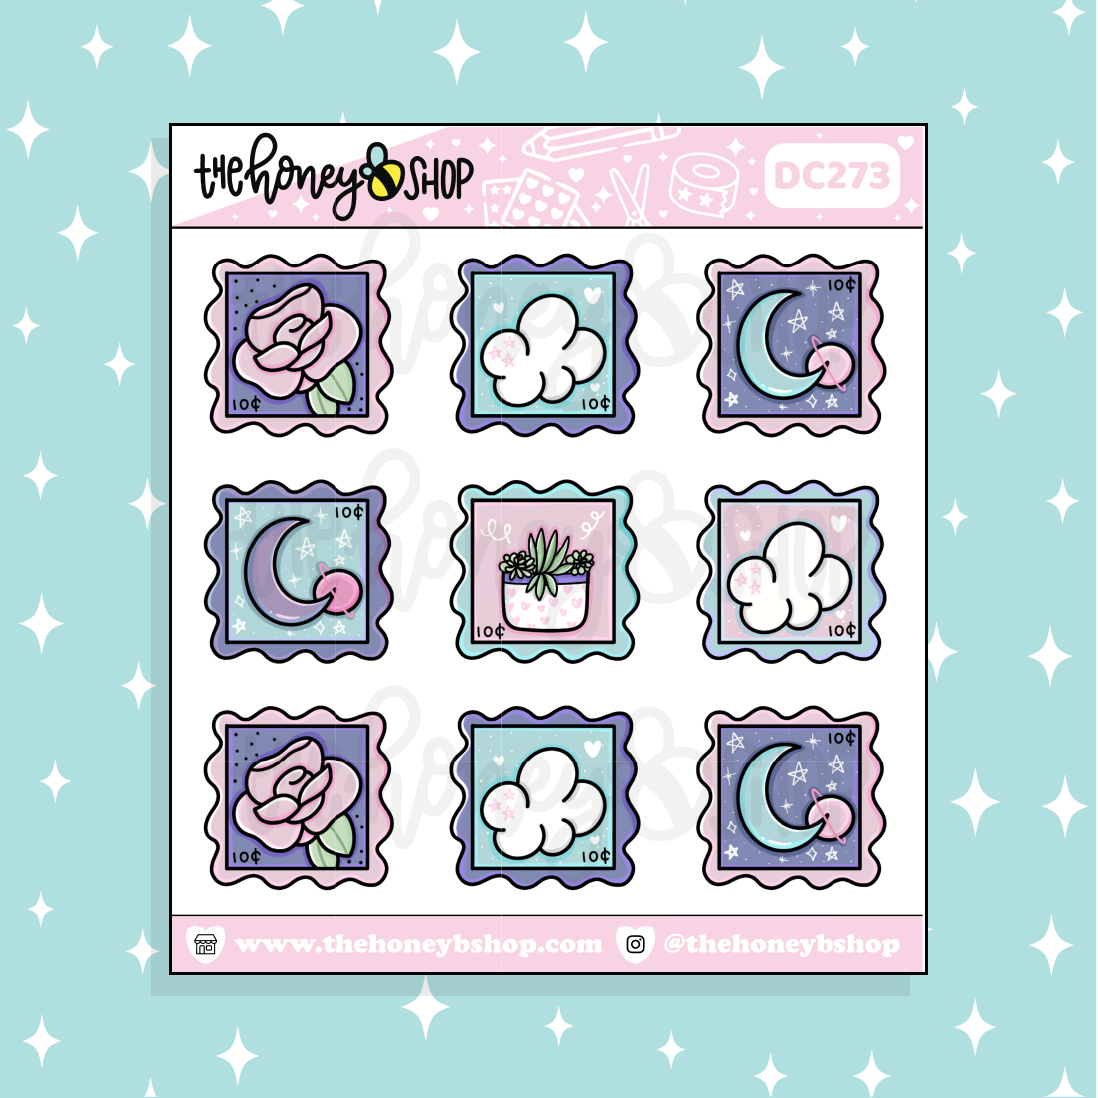 Dreamy Stamps Doodle Sticker